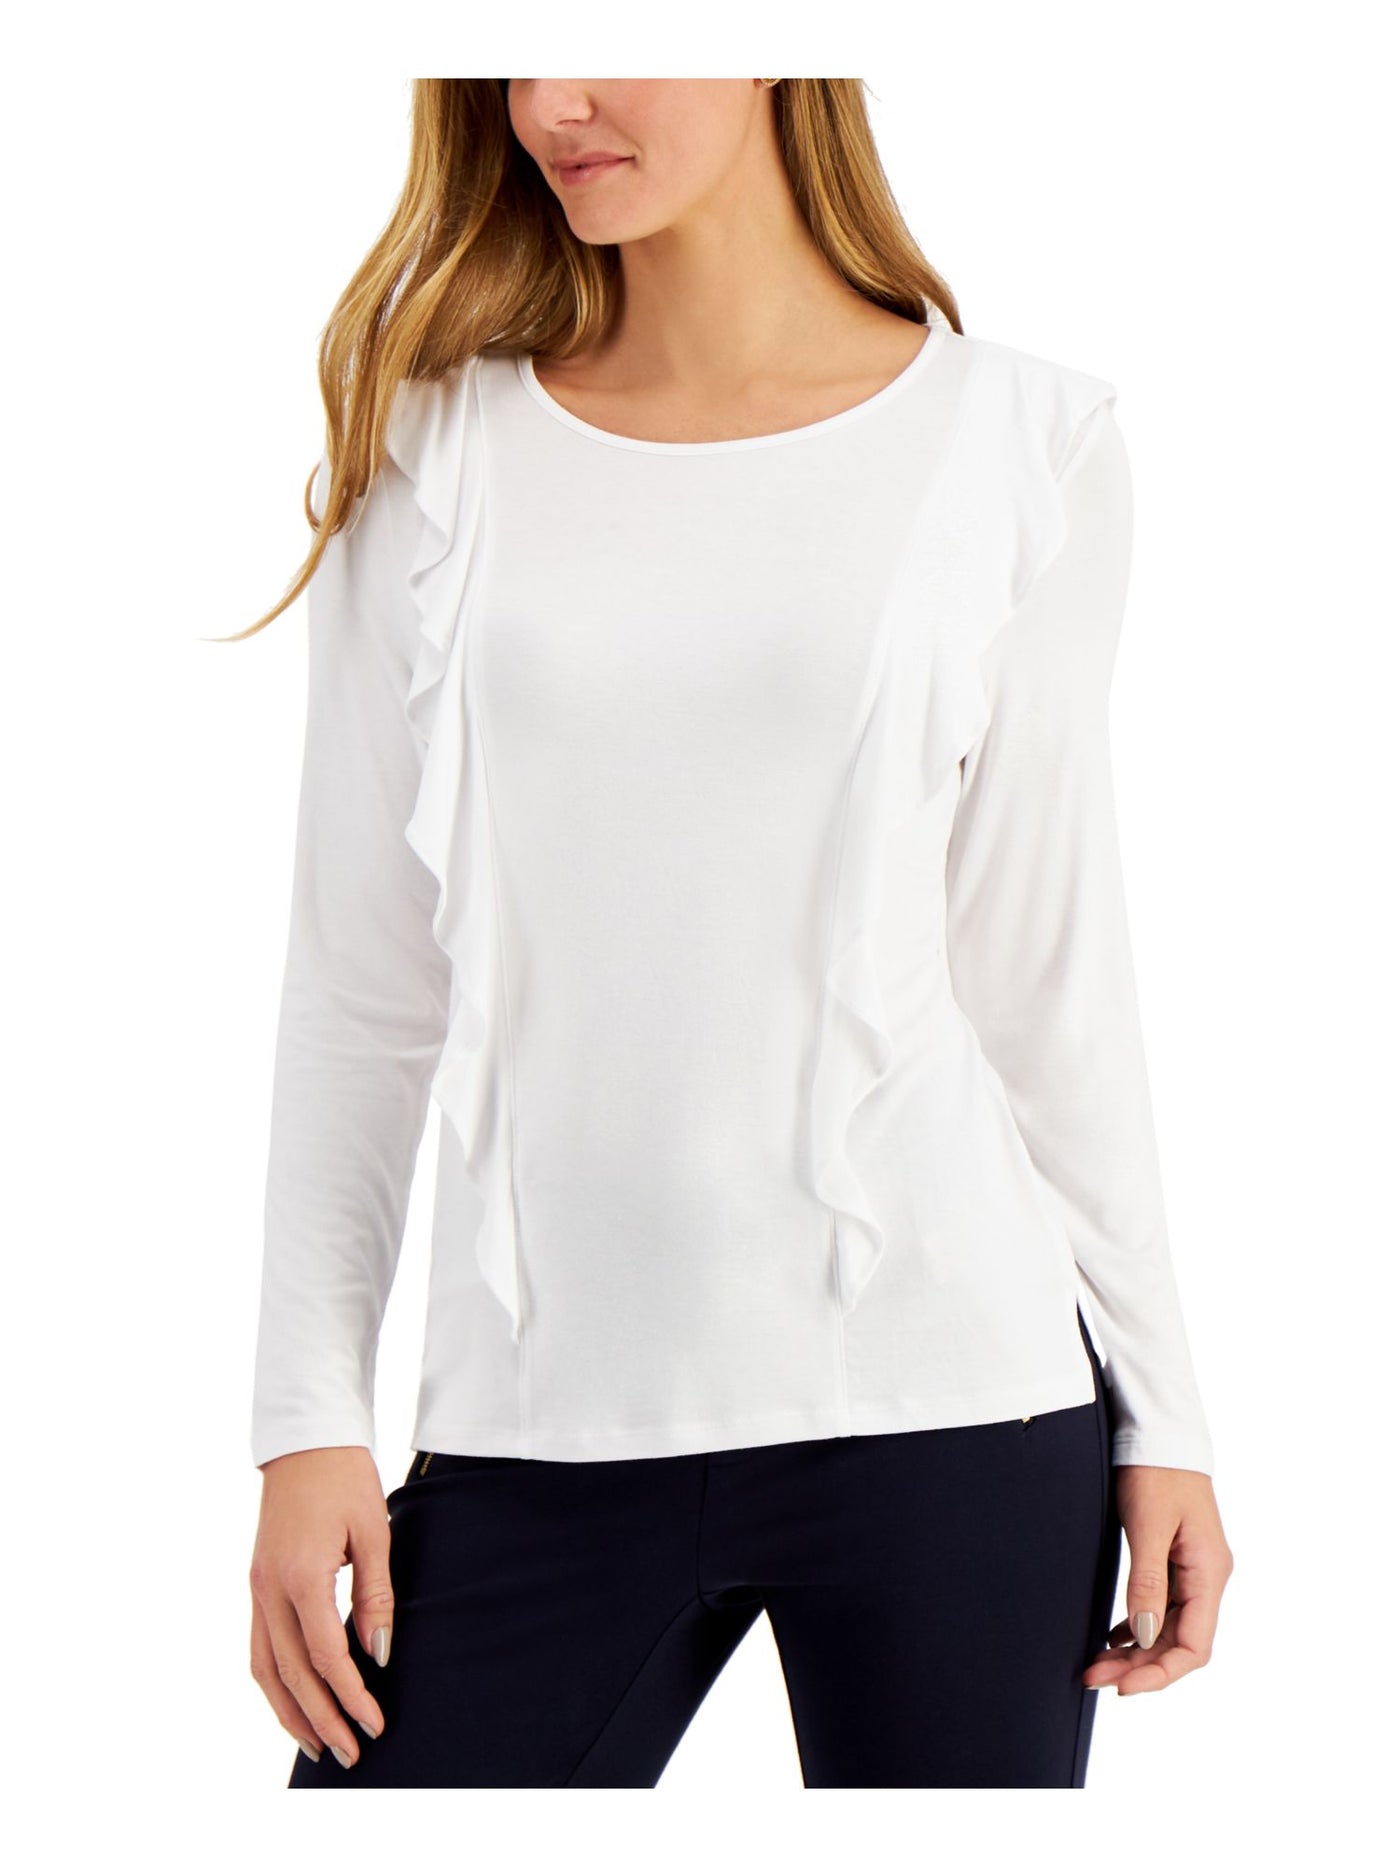 CHARTER CLUB Womens White Stretch Ruffled Long Sleeve Jewel Neck Wear To Work Top Petites PM